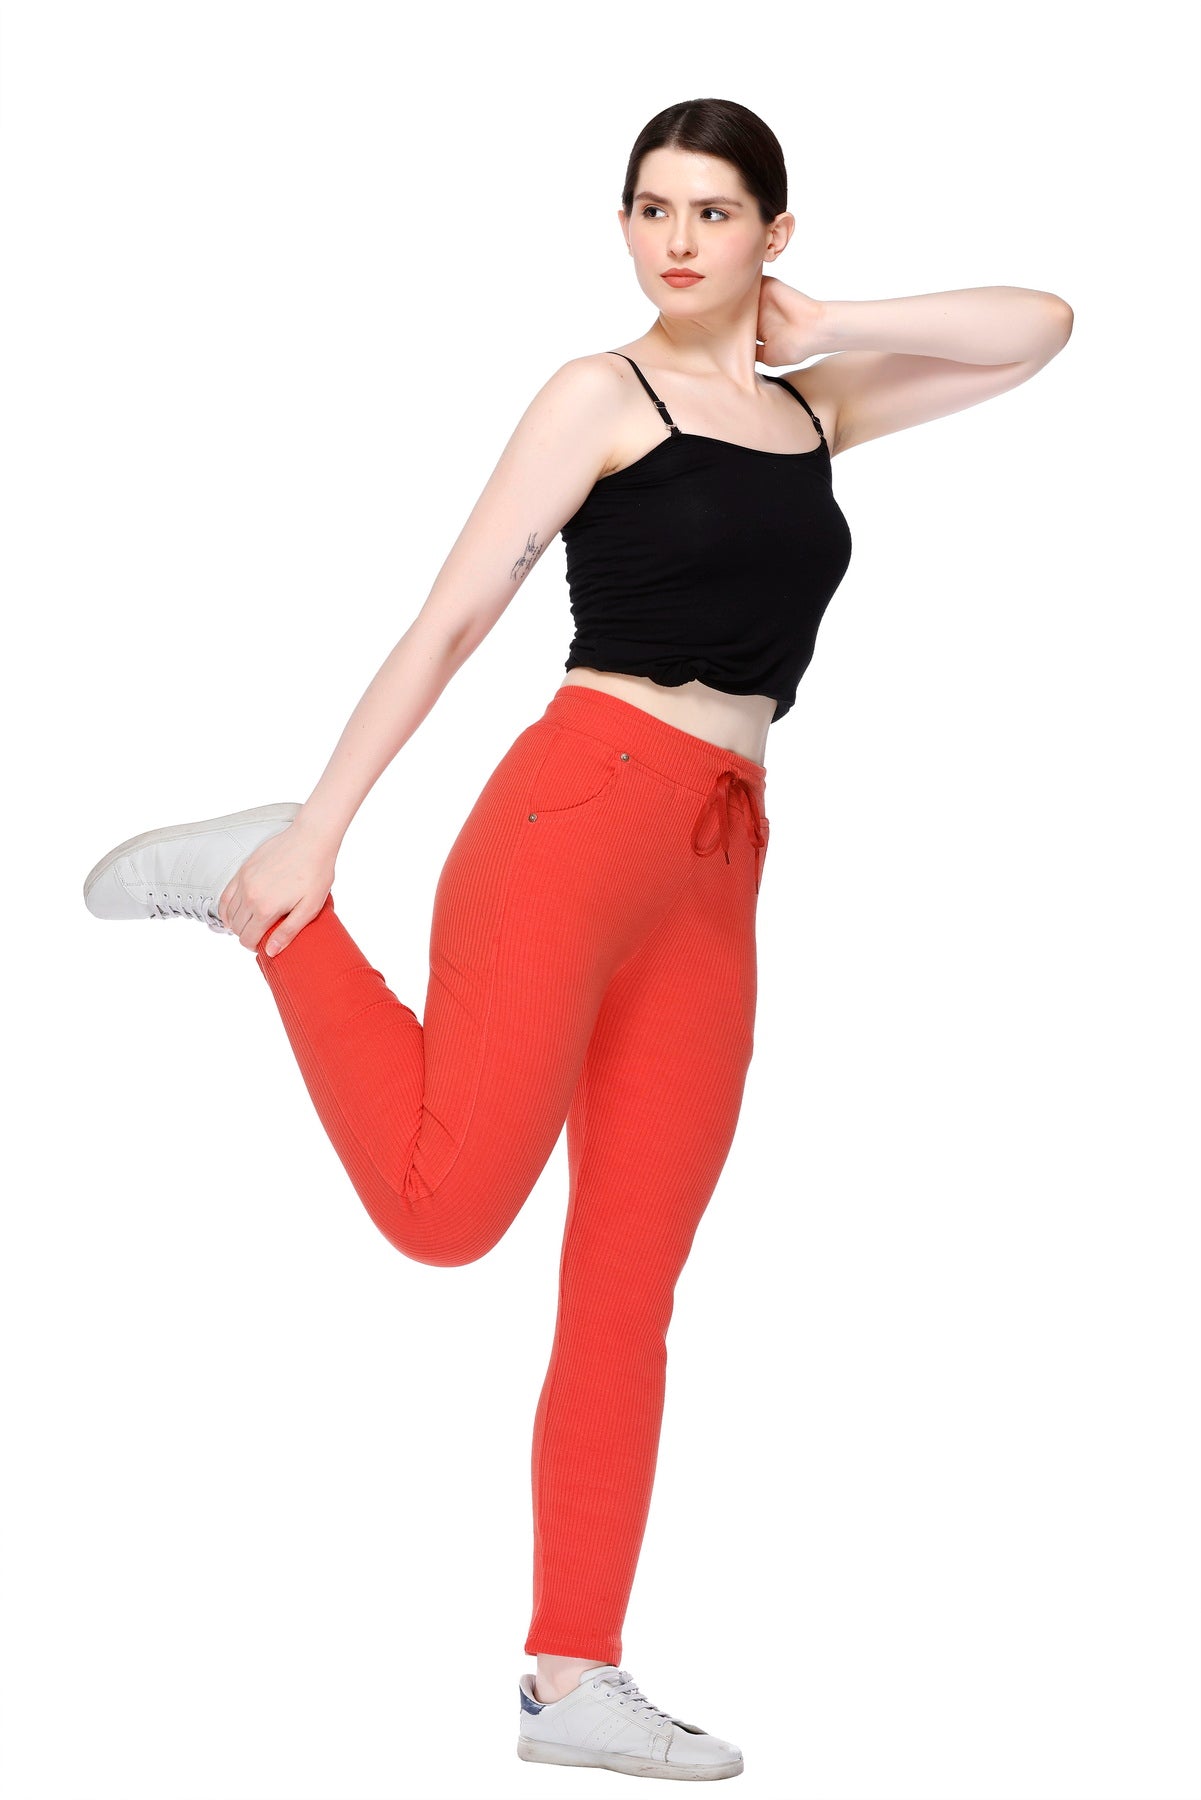 Gym Track Pants For Women - Buy Gym Track Pants For Women online in India